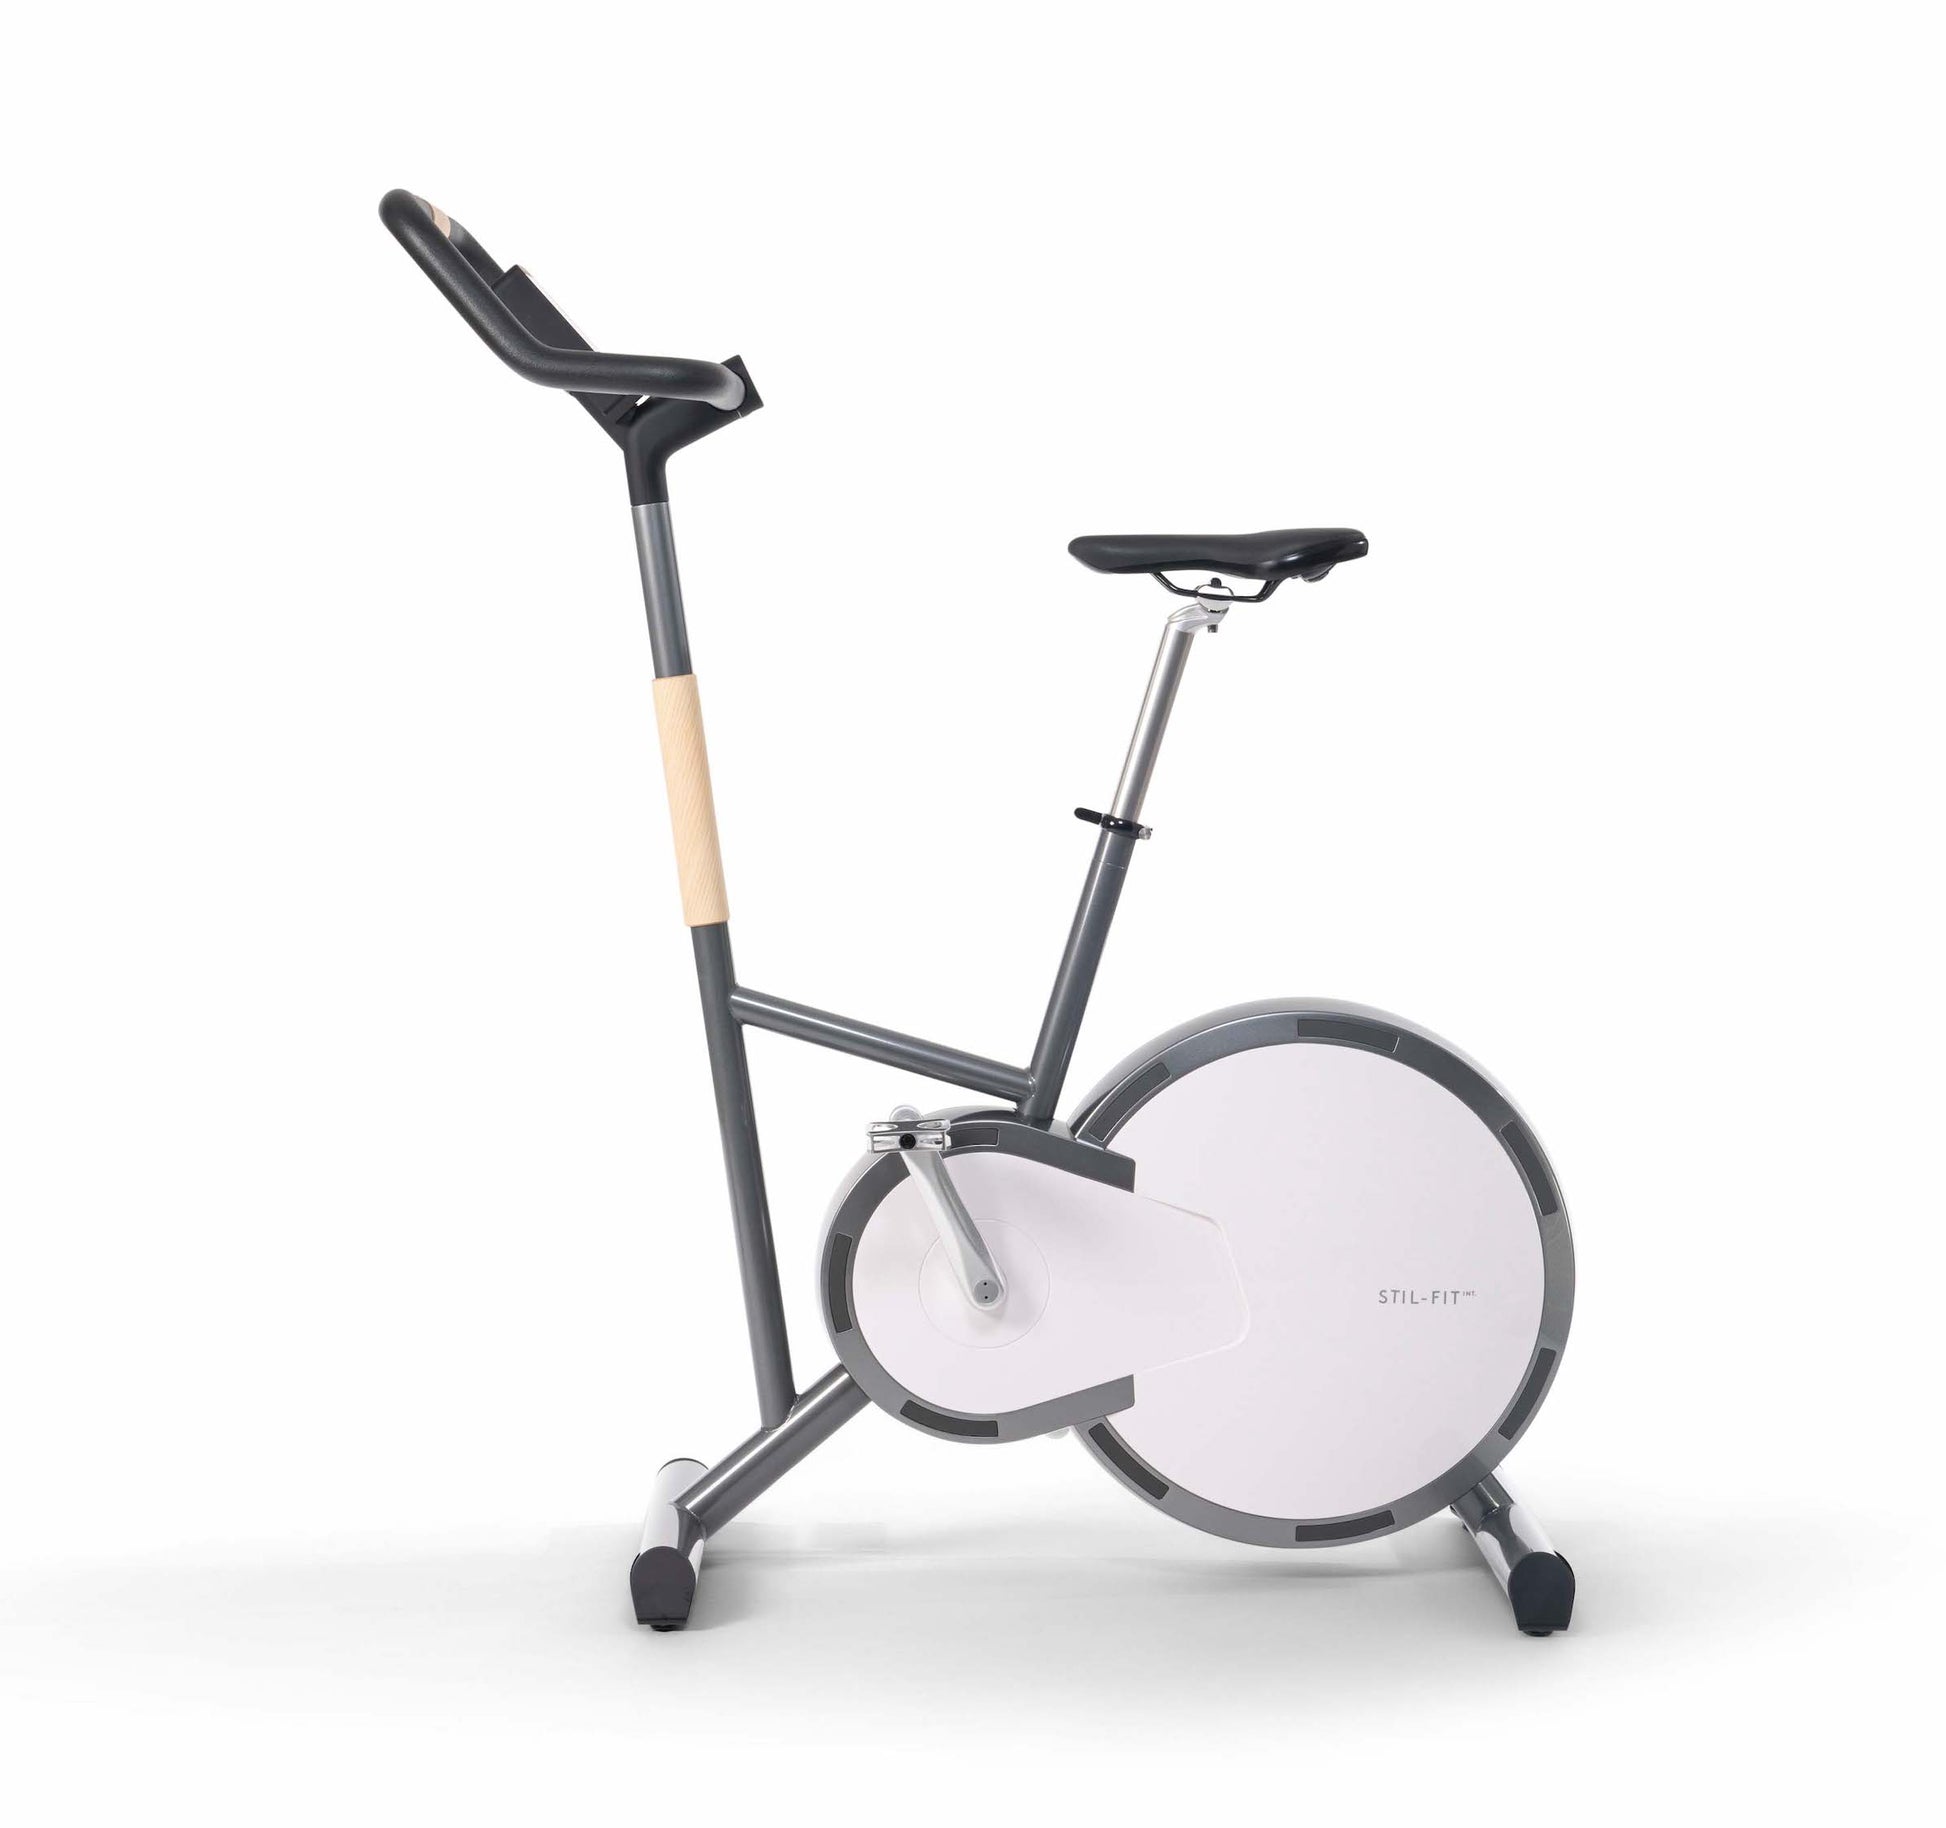 Stil-Fit Ergometer - different grip positions and a multifunctional console. Compatible with training apps like Kinomap and Zwift. Cycling Bears.